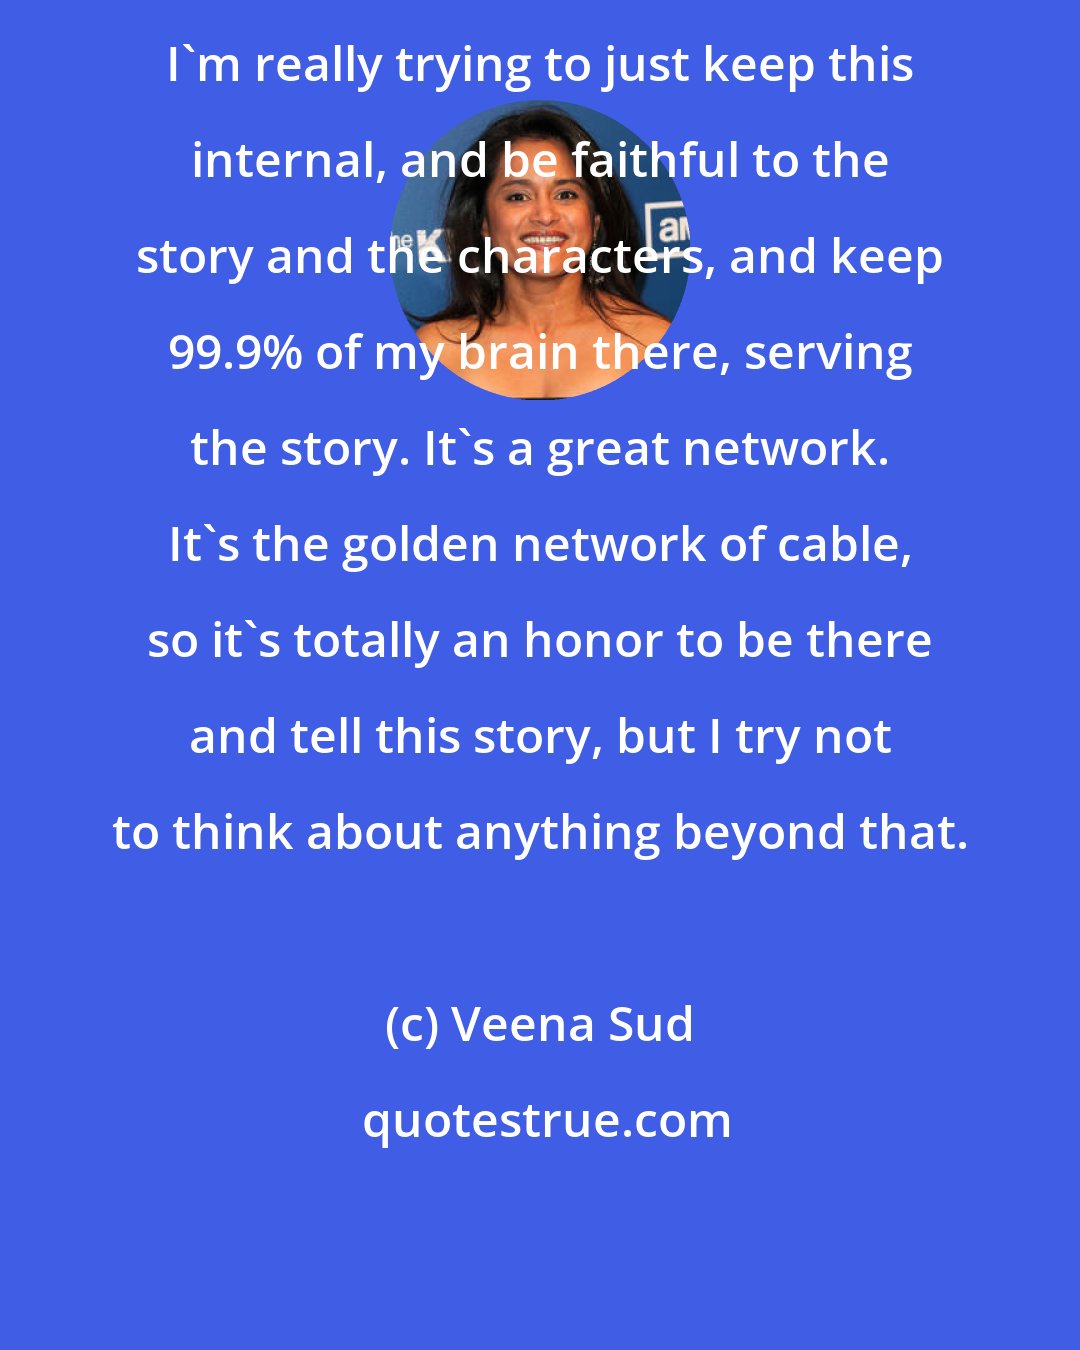 Veena Sud: I'm really trying to just keep this internal, and be faithful to the story and the characters, and keep 99.9% of my brain there, serving the story. It's a great network. It's the golden network of cable, so it's totally an honor to be there and tell this story, but I try not to think about anything beyond that.